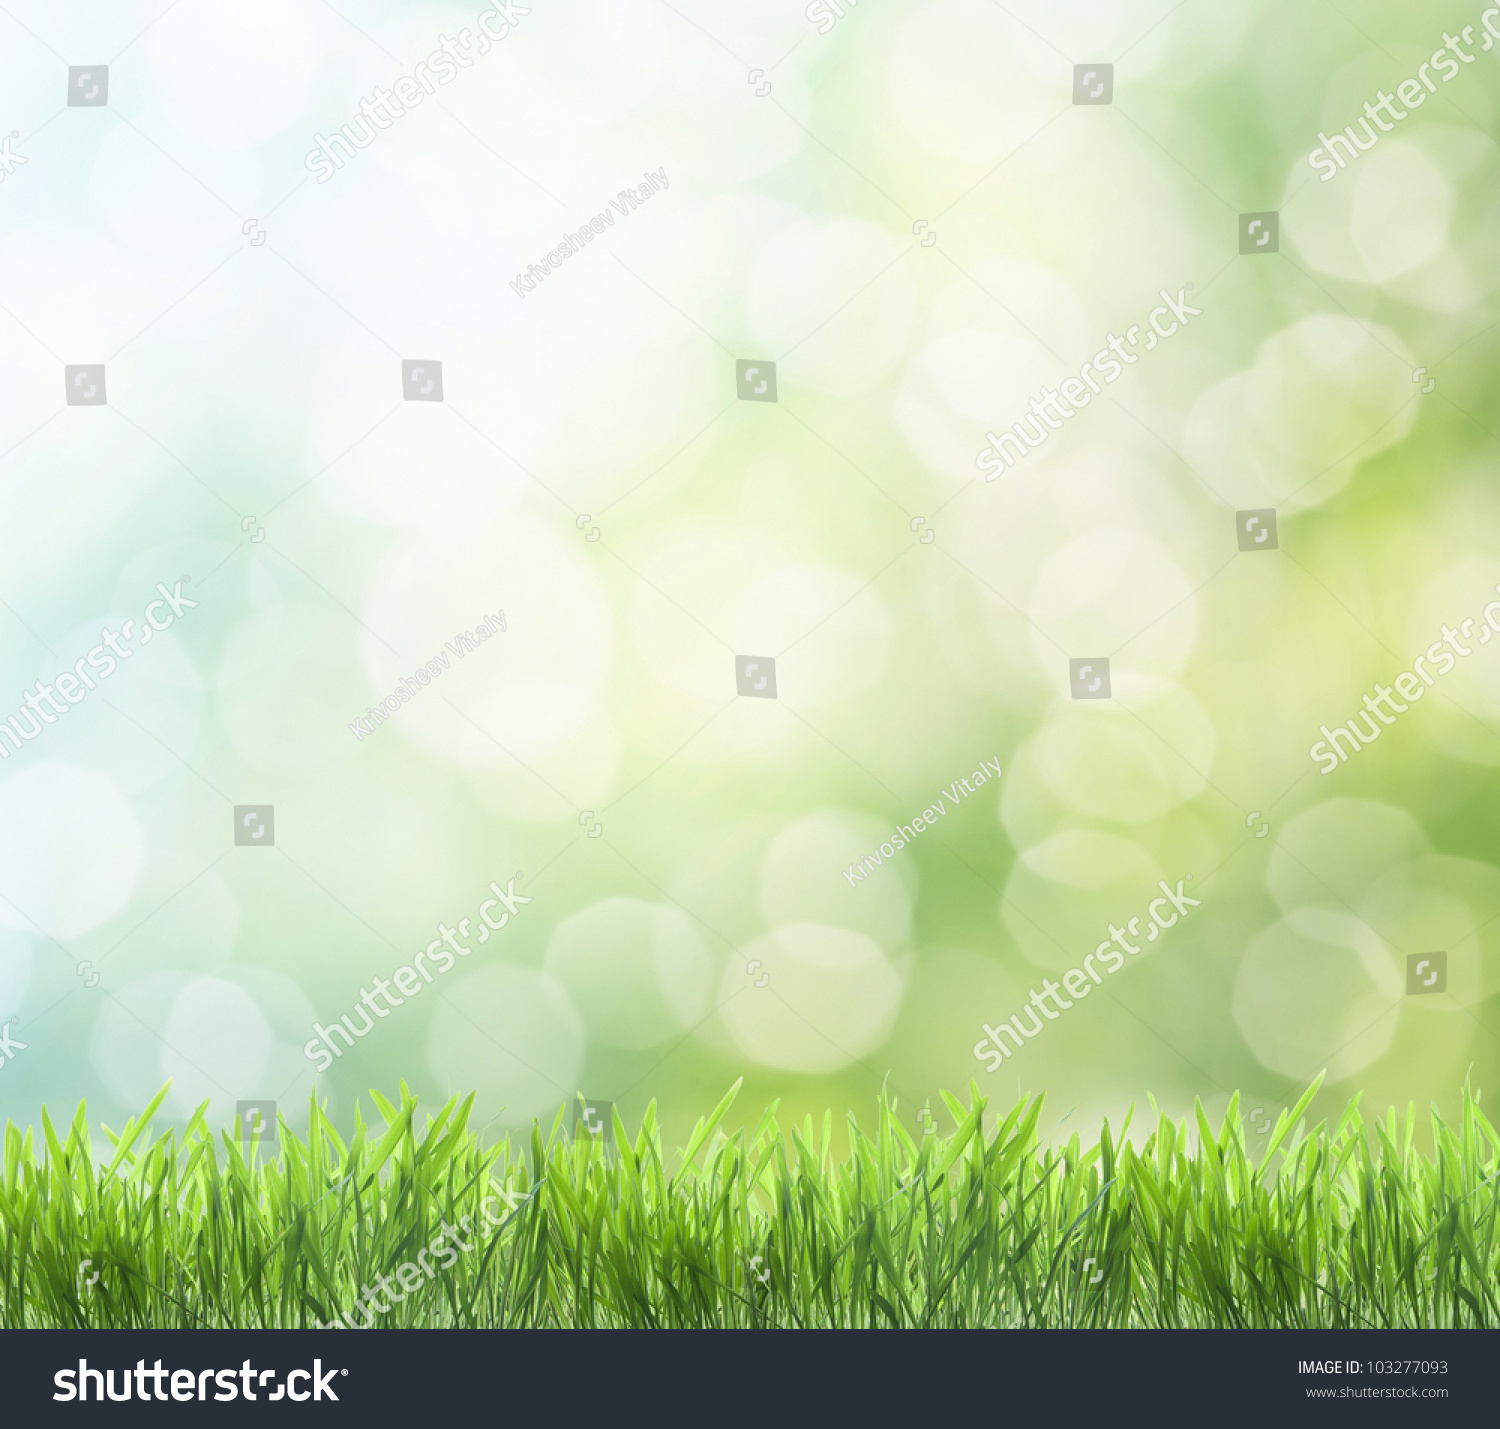 Fresh Spring Green Grass Isolated On Stock Photo 103277093 ...